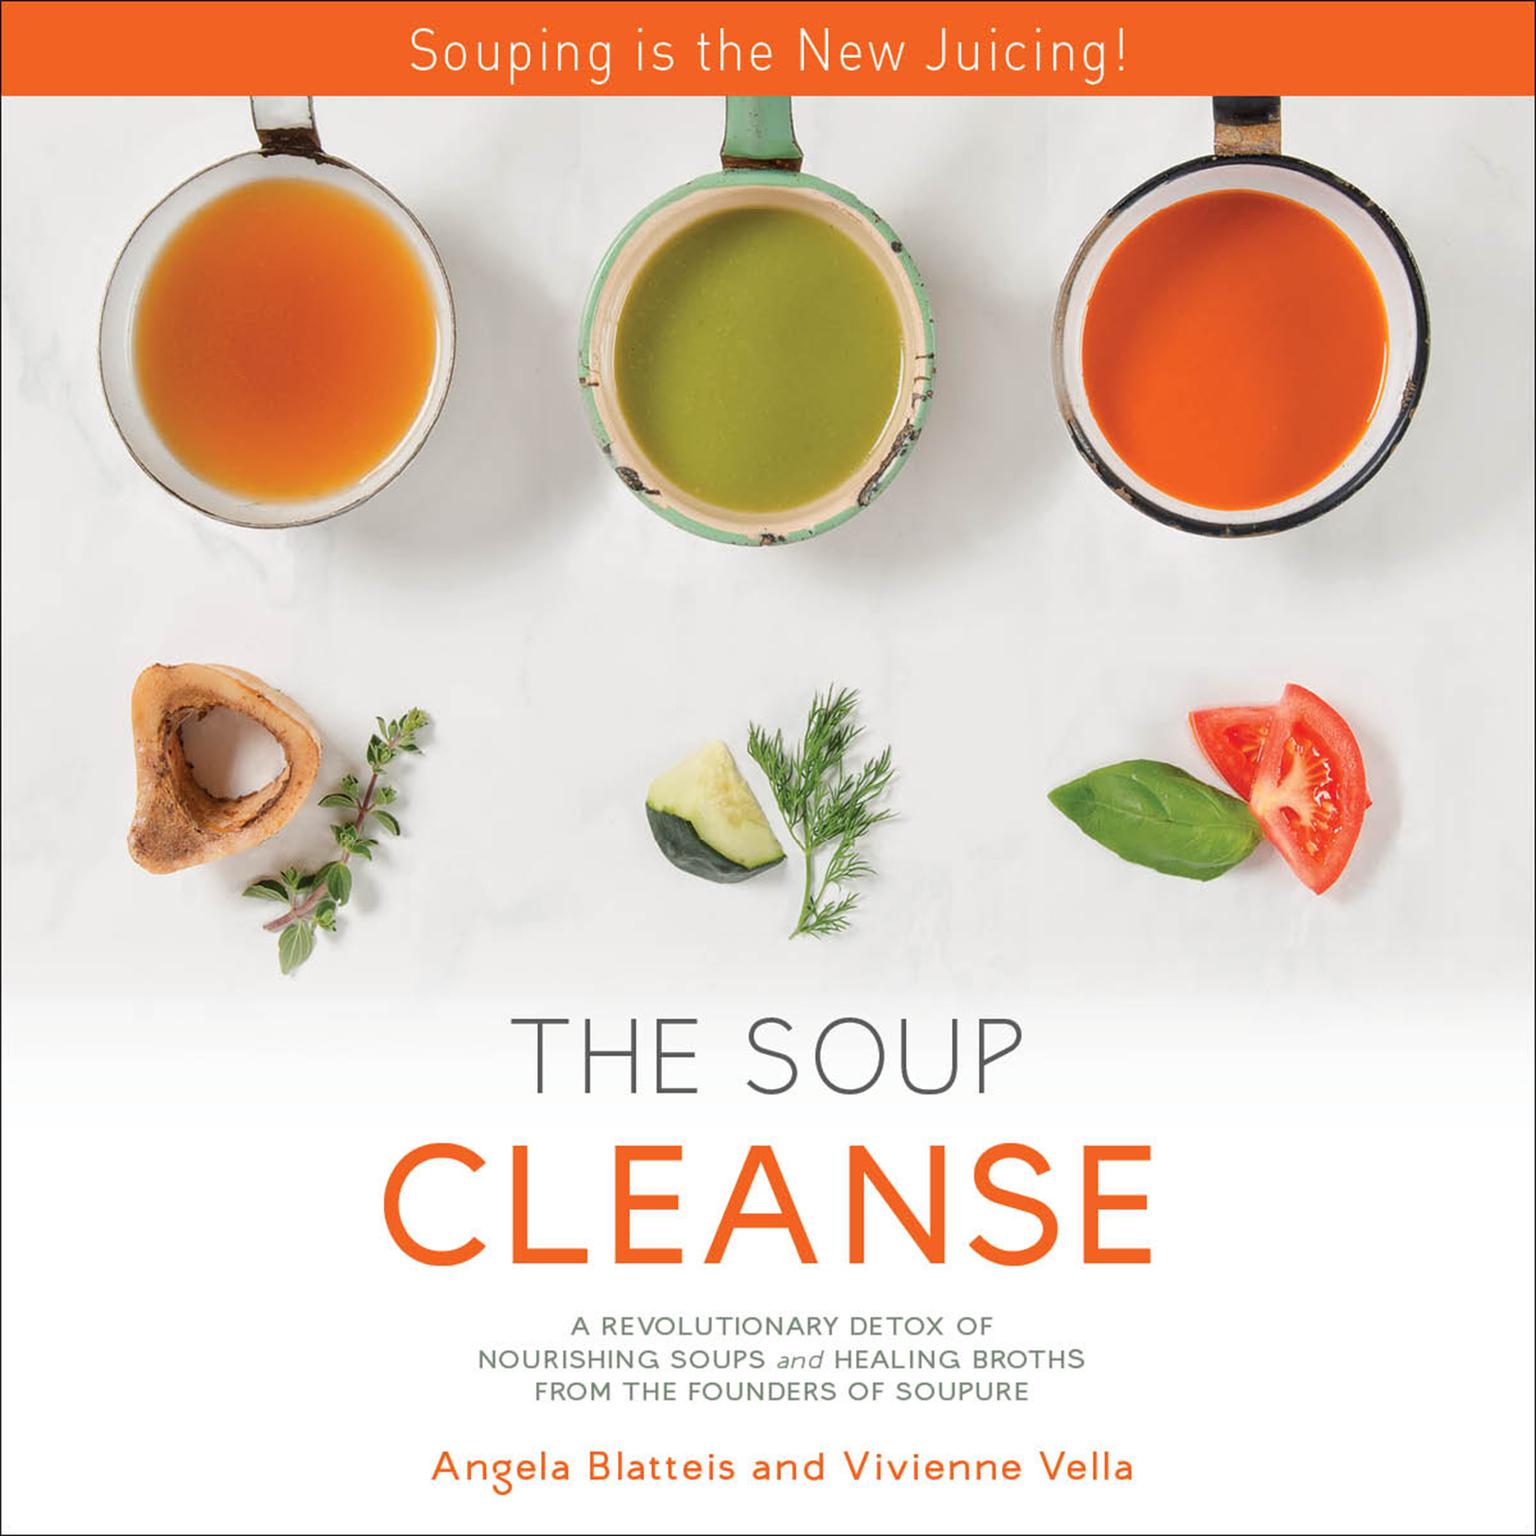 THE SOUP CLEANSE: A Revolutionary Detox of Nourishing Soups and Healing Broths from the Founders of Soupure Audiobook, by Angela Blatteis